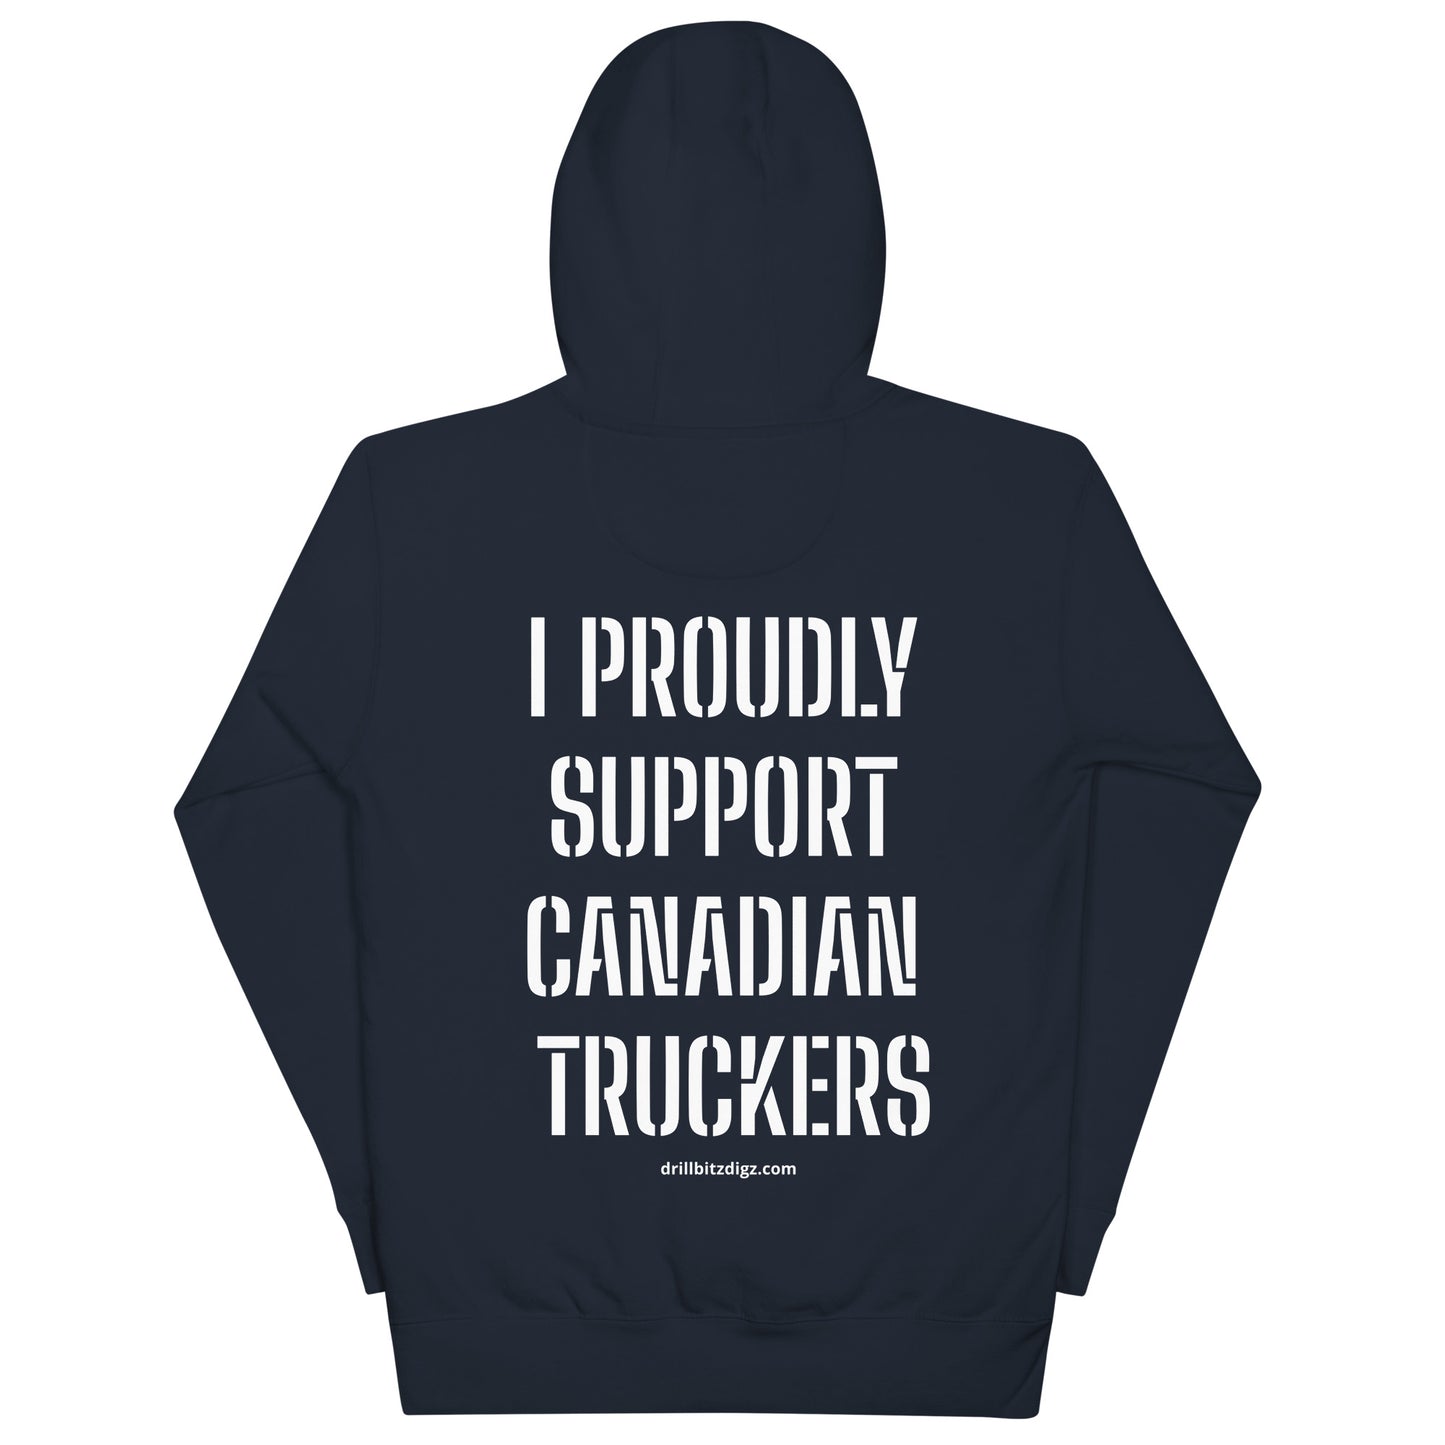 I PROUDLY SUPPORT CANADIAN TRUCKERS Hoodie